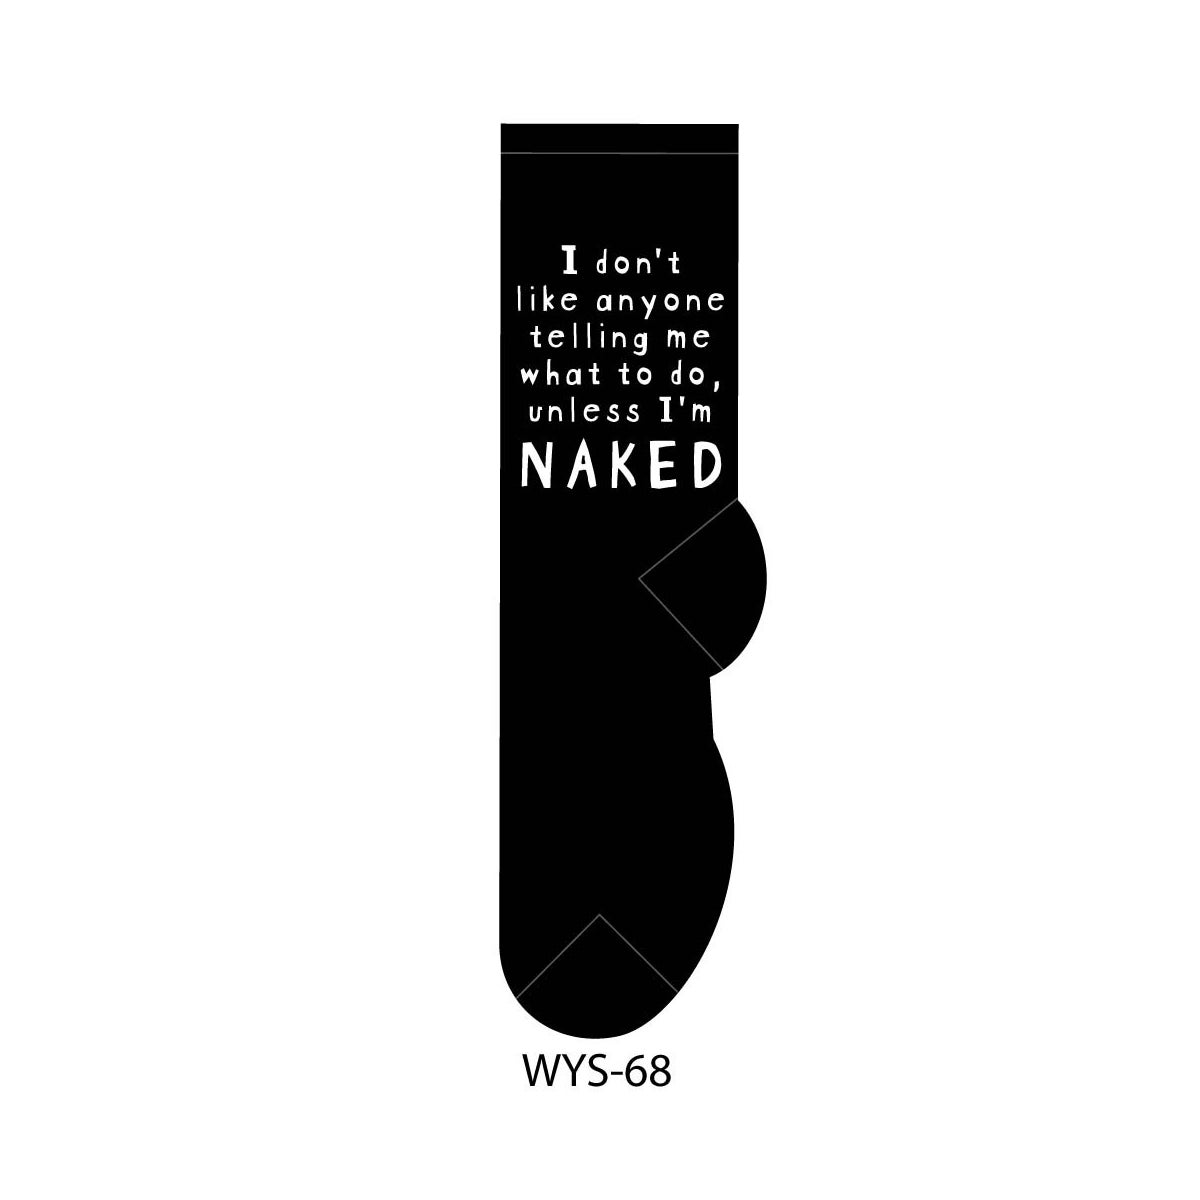 I don't like anyone telling me what to do, unless I'm naked